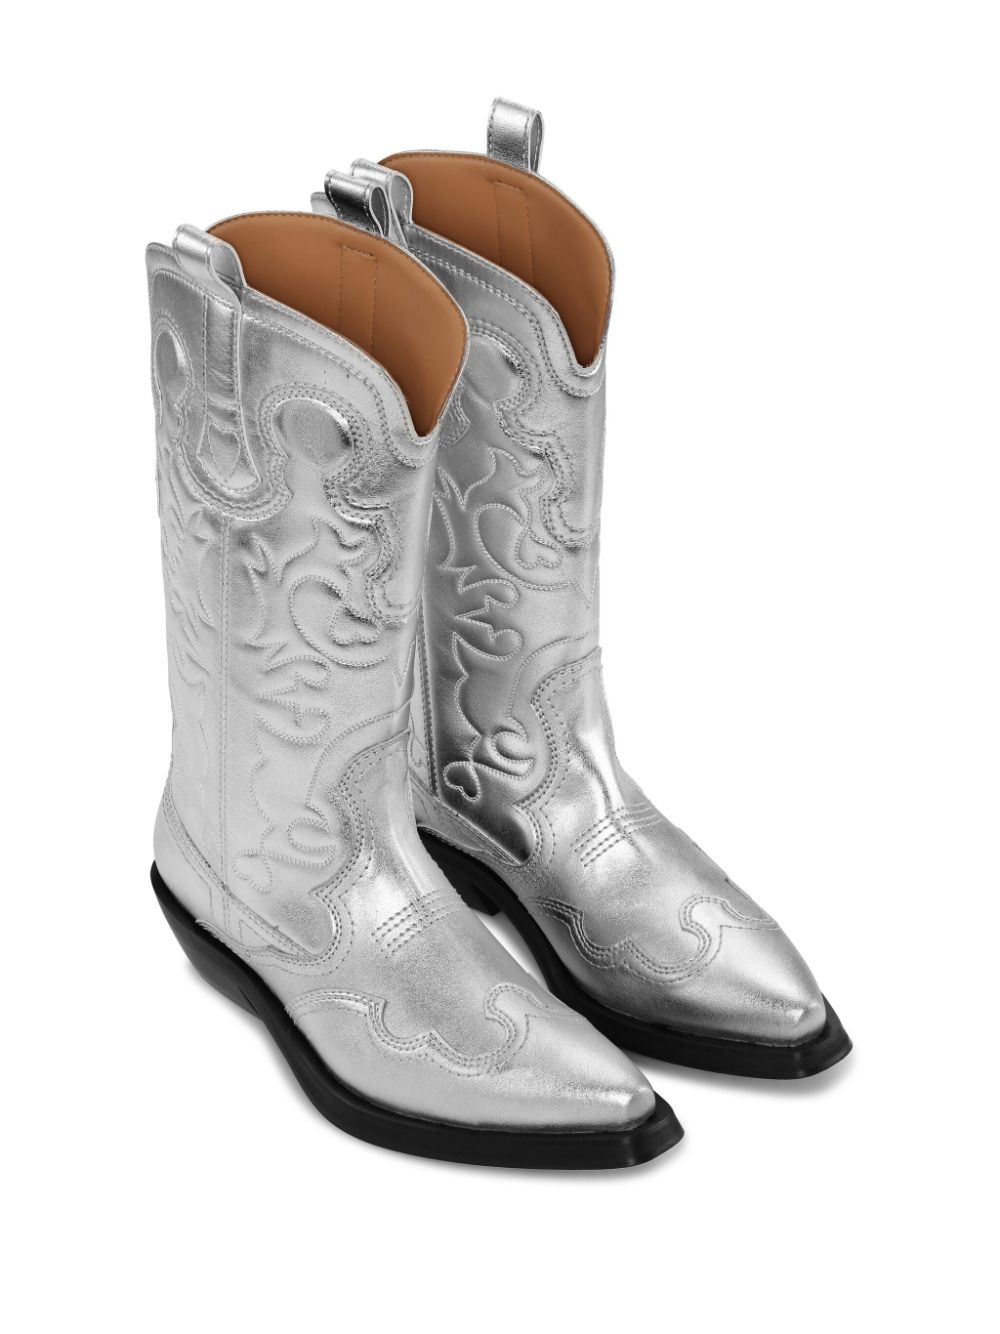 40mm metallic leather Western boots - 2